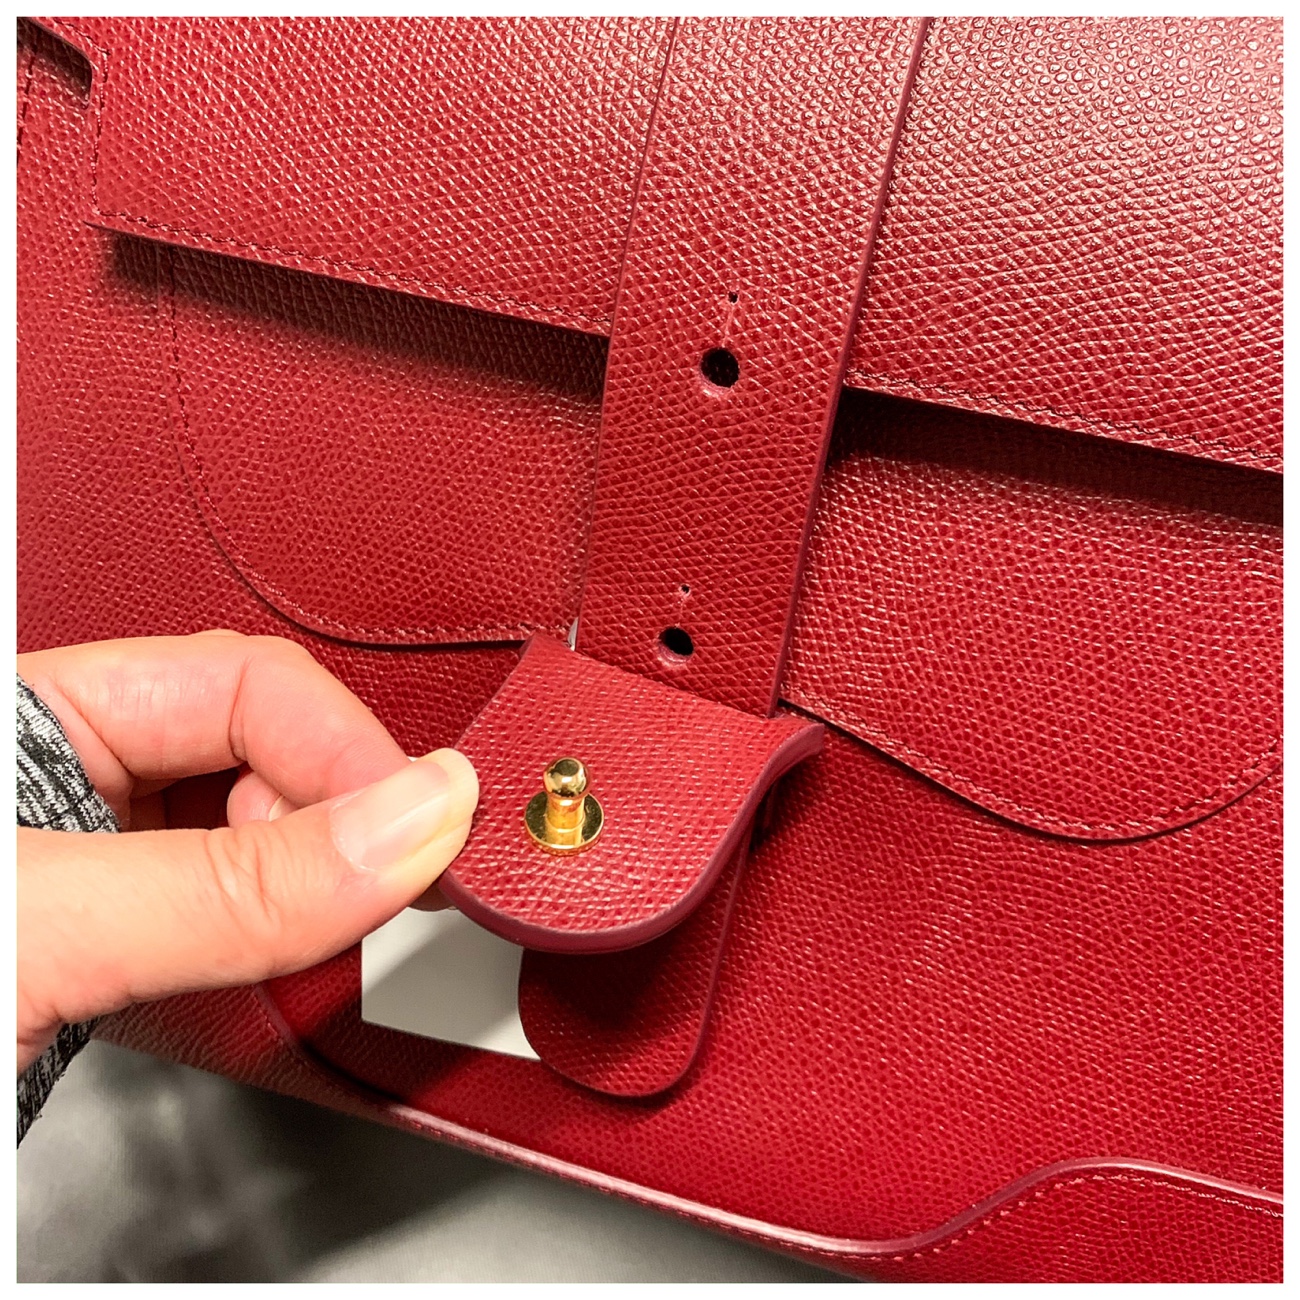 Senreve Alunna VS Aria Belt Bag Comparison and Honest Review, What's in my  bag